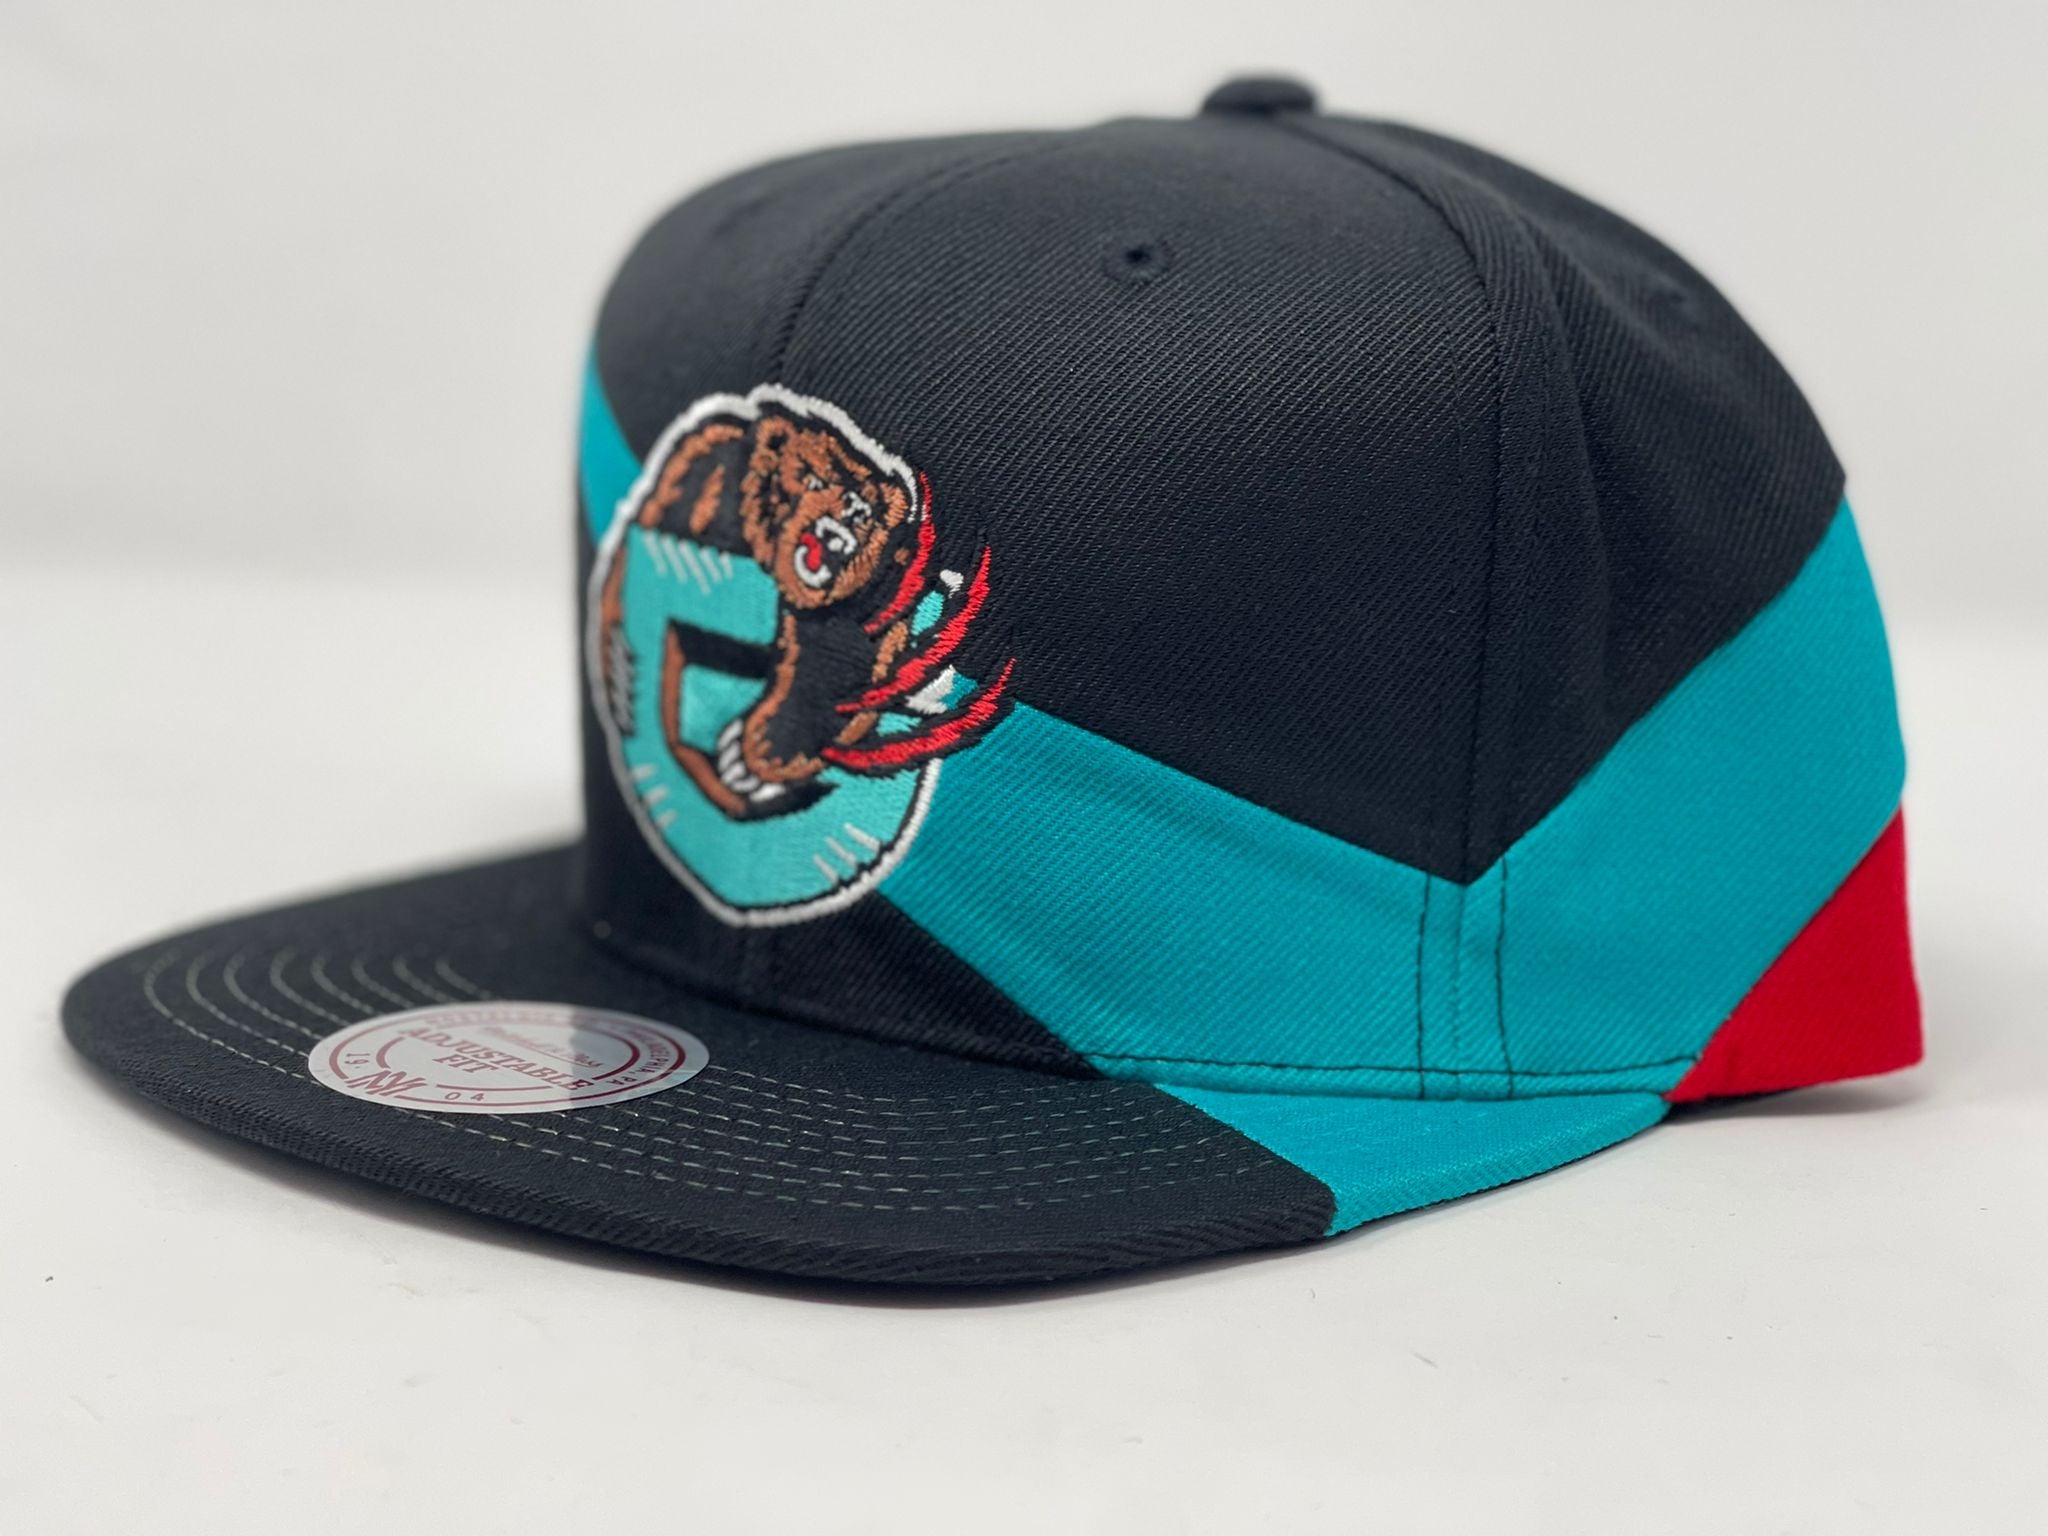 mitchell and ness grizzlies snapback